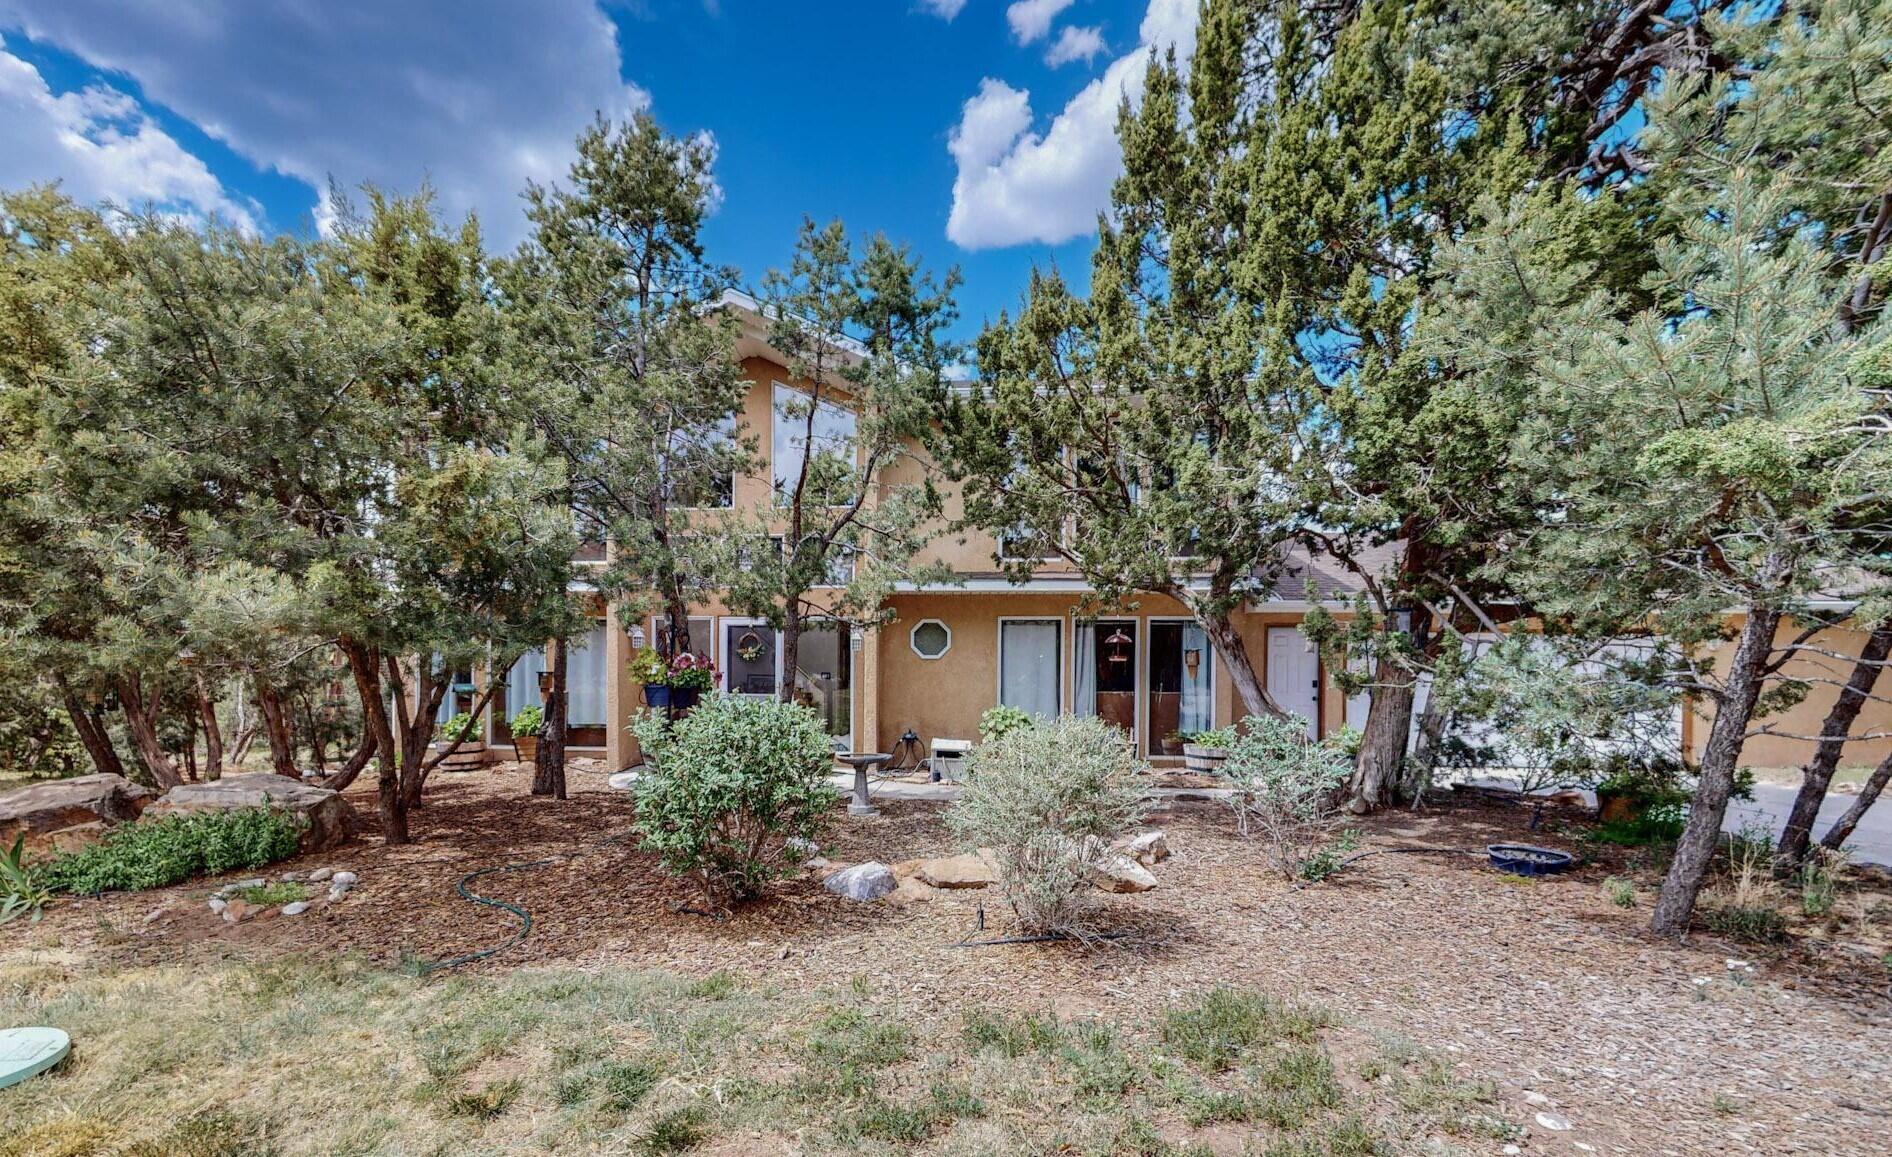 Owner says it's like living in a Treehouse in a Birder's Paradise.  This custom contemporary home is nested amongst the pines on a half-acre lot in Sierra Vista Estates which boasts an excellent community water system, a private park, and access to the Milne/Gutierrez Open Space for hiking and biking.  Established landscaping includes perennial gardens, a fenced grass back yard, RV storage, walking paths.  Ground level deck and 2 tree top decks for enjoying the views and privacy. Main living area on second floor has a flexible plan.  Custom hickory cabinetry and a large island in the kitchen with gas range, two large pantries and a planning desk.  Pellet stove heats the upstairs, mini splits in every room.  Main level has 2 large bedrooms, one in suite with bath.